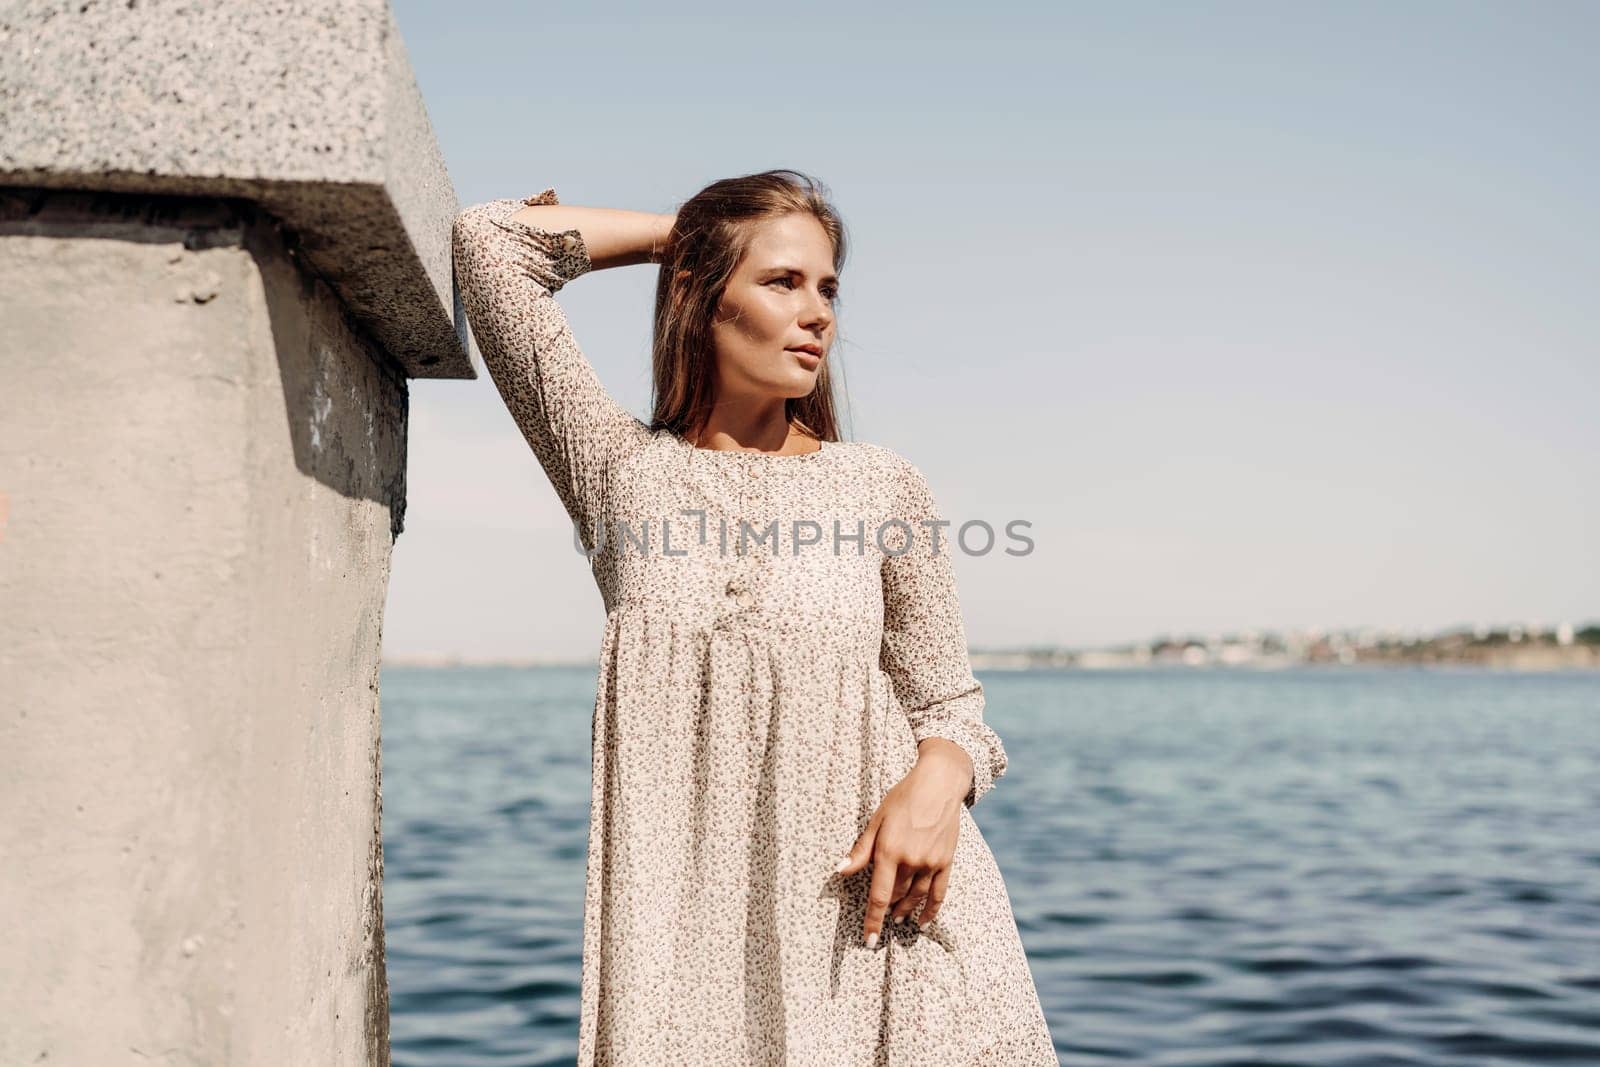 A woman is standing on a dock by the water, wearing a dress and a pair of black shoes. She is smiling and she is happy